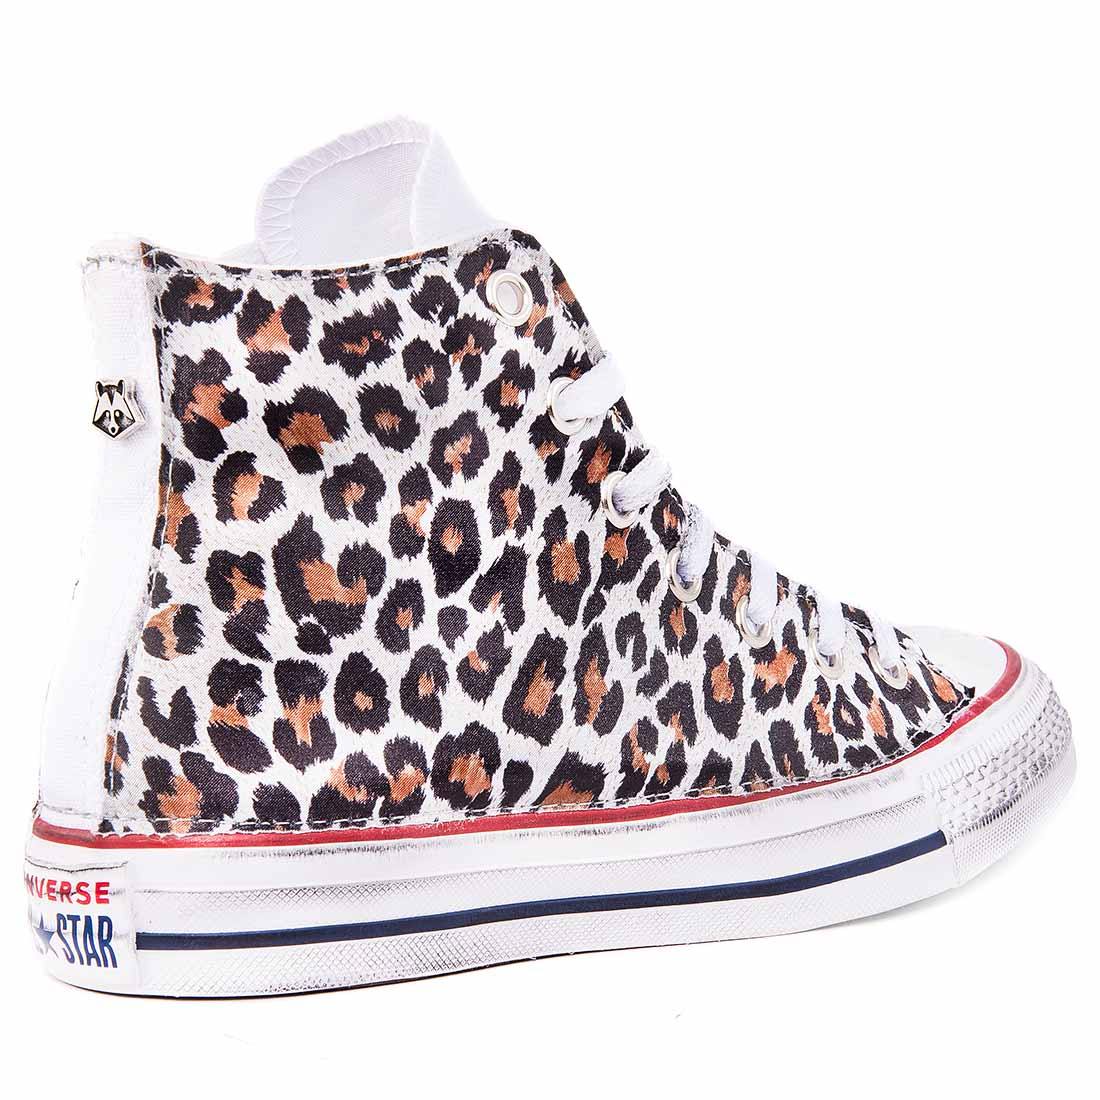 All-Star-Leopardate-Converse-Animalier-Maculate-Personalizzate-Racoon-LAB